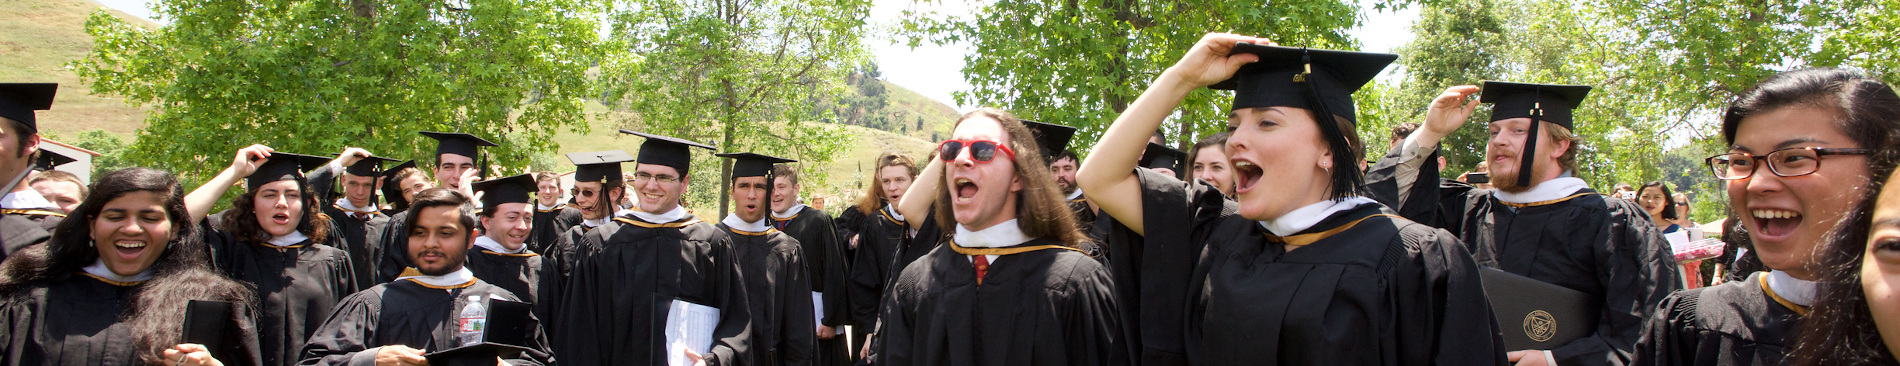 Students prepare to toss their mortarboards at Commencement